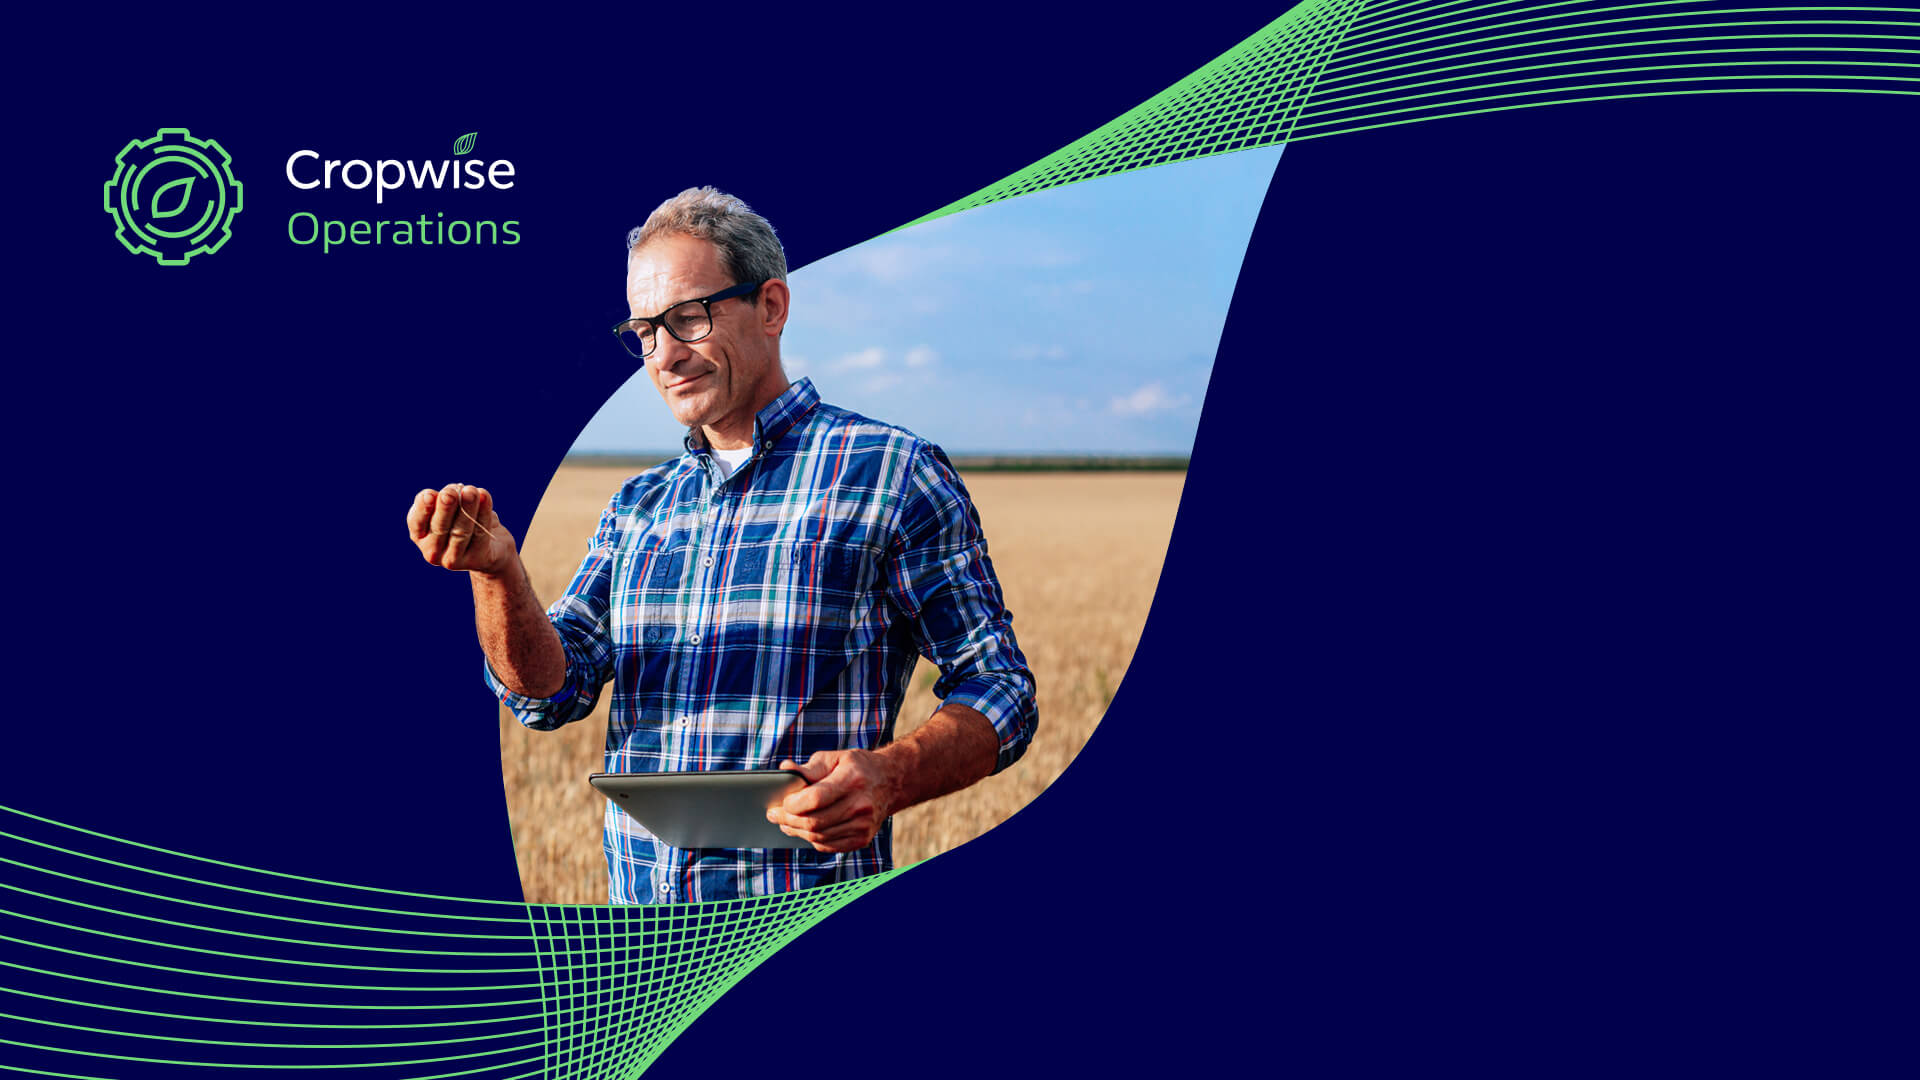 Cropwise operations available on computer